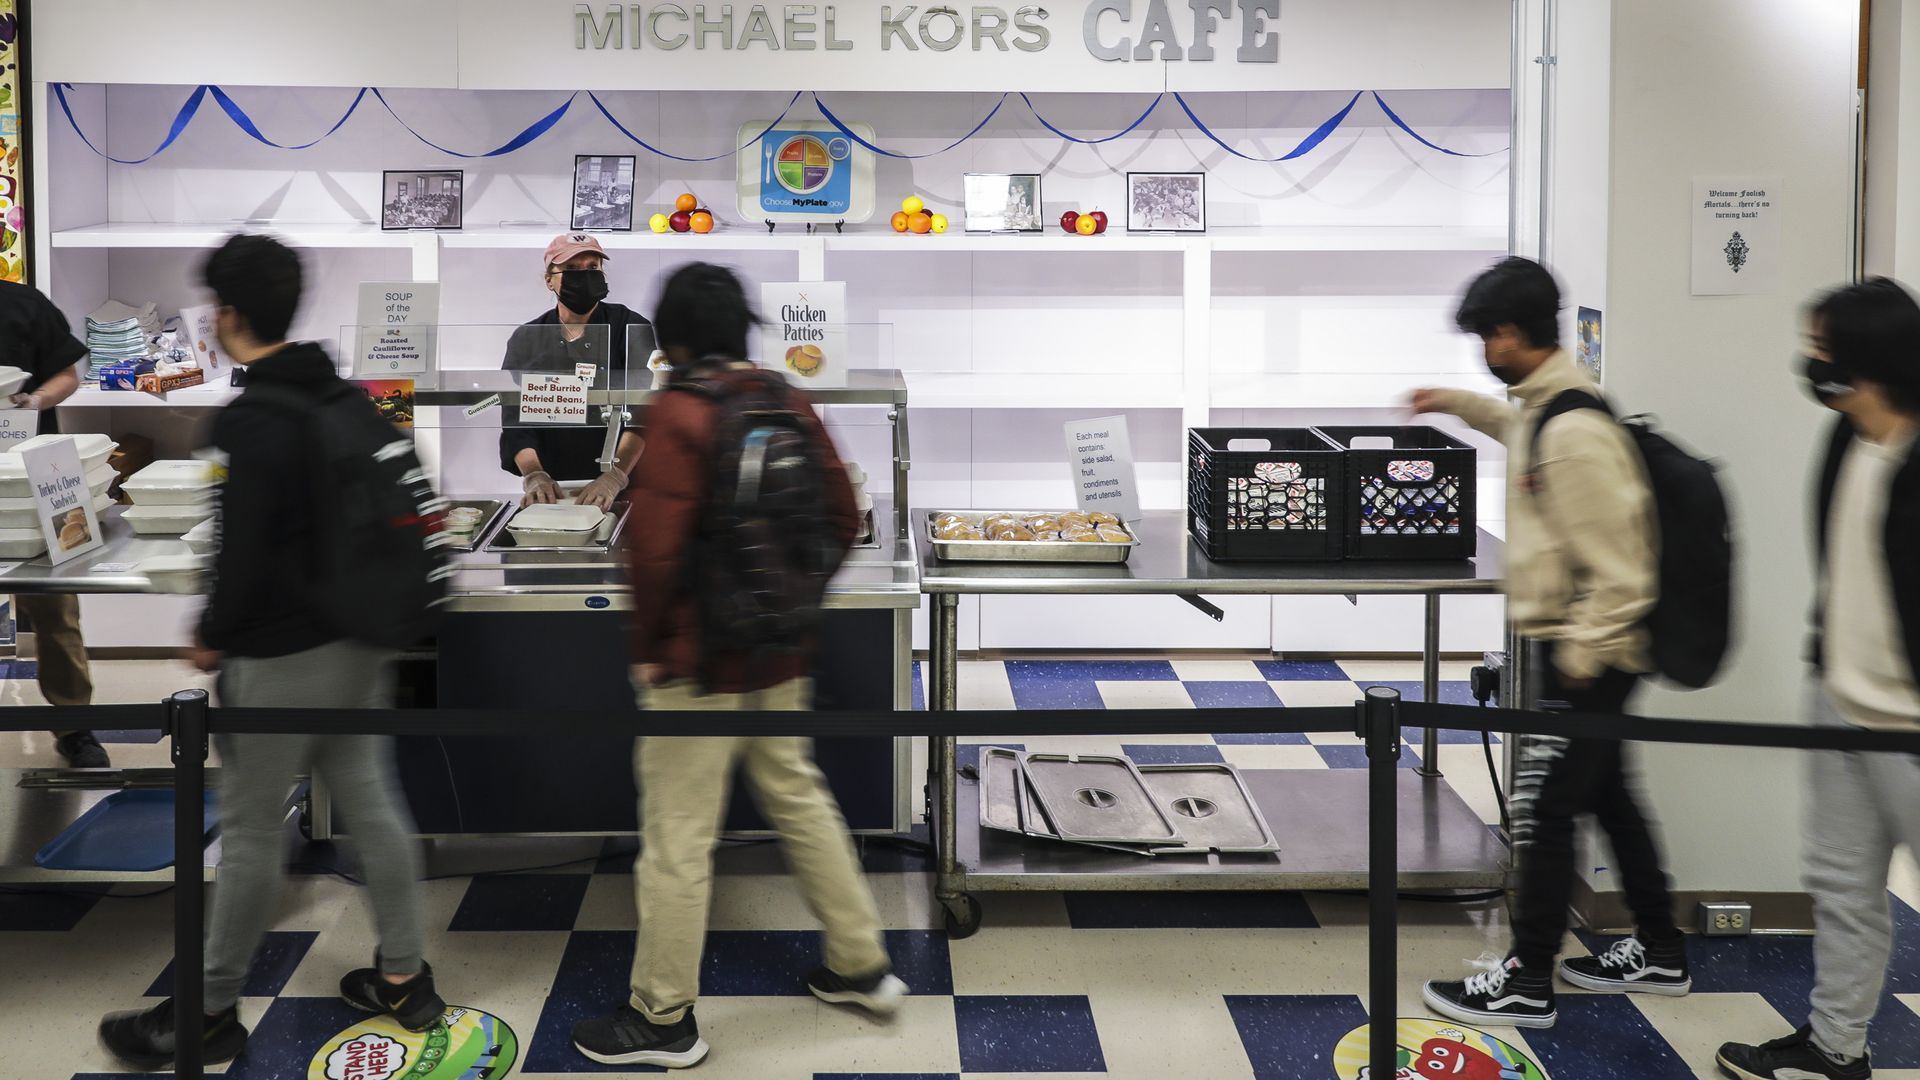 Pat Teague, executive chef of the Burlington School District, works the lunch counter at the Michael Kors Cafe, located at Burlington High School's new campus in Burlington, VT on March 16, 2021. 